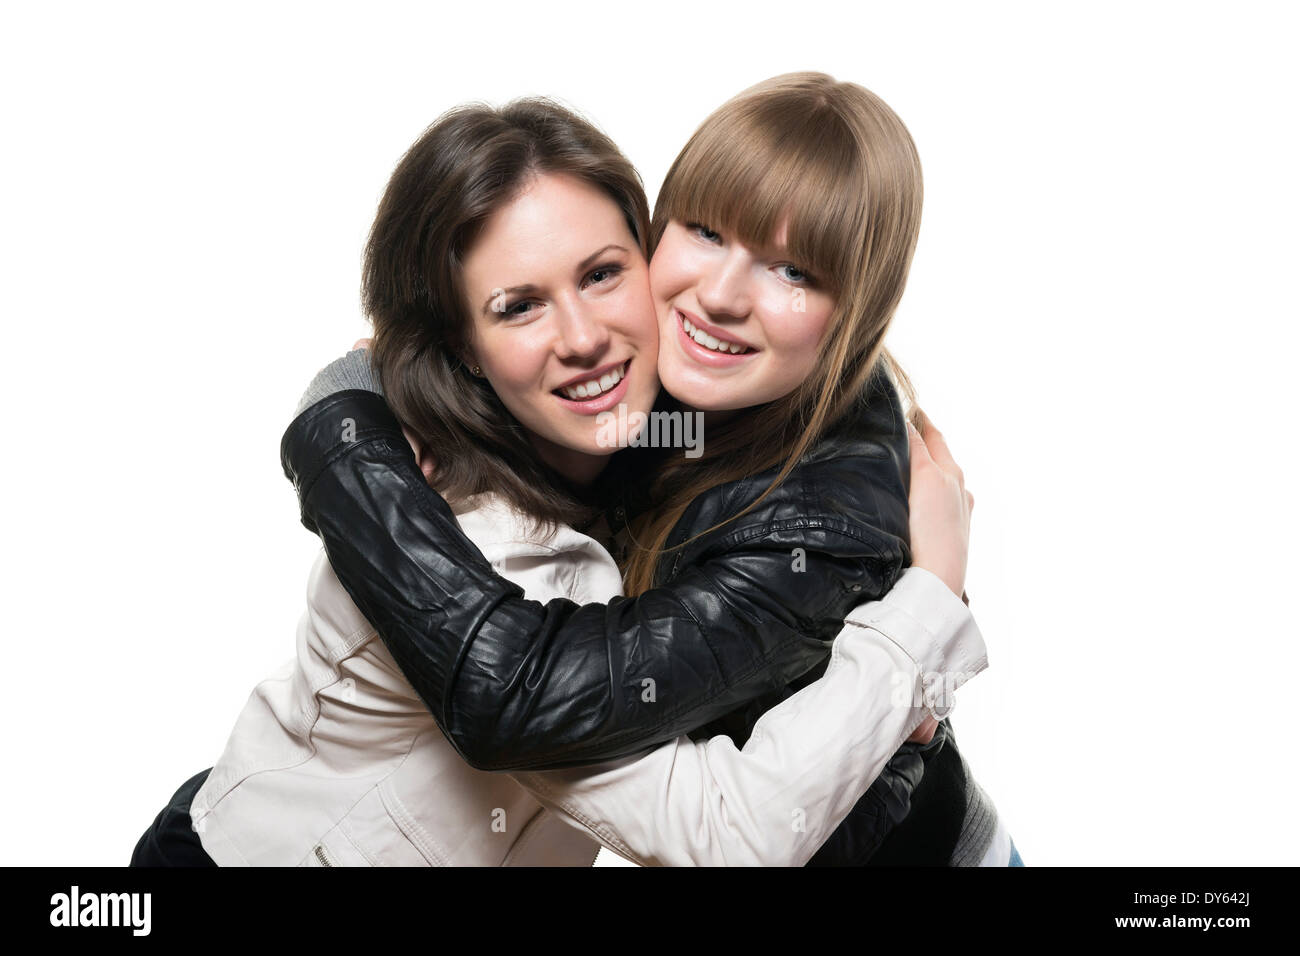 Portrait of two happy woman, blond and brunette, with black and white leather jacket, isolated on white background Stock Photo